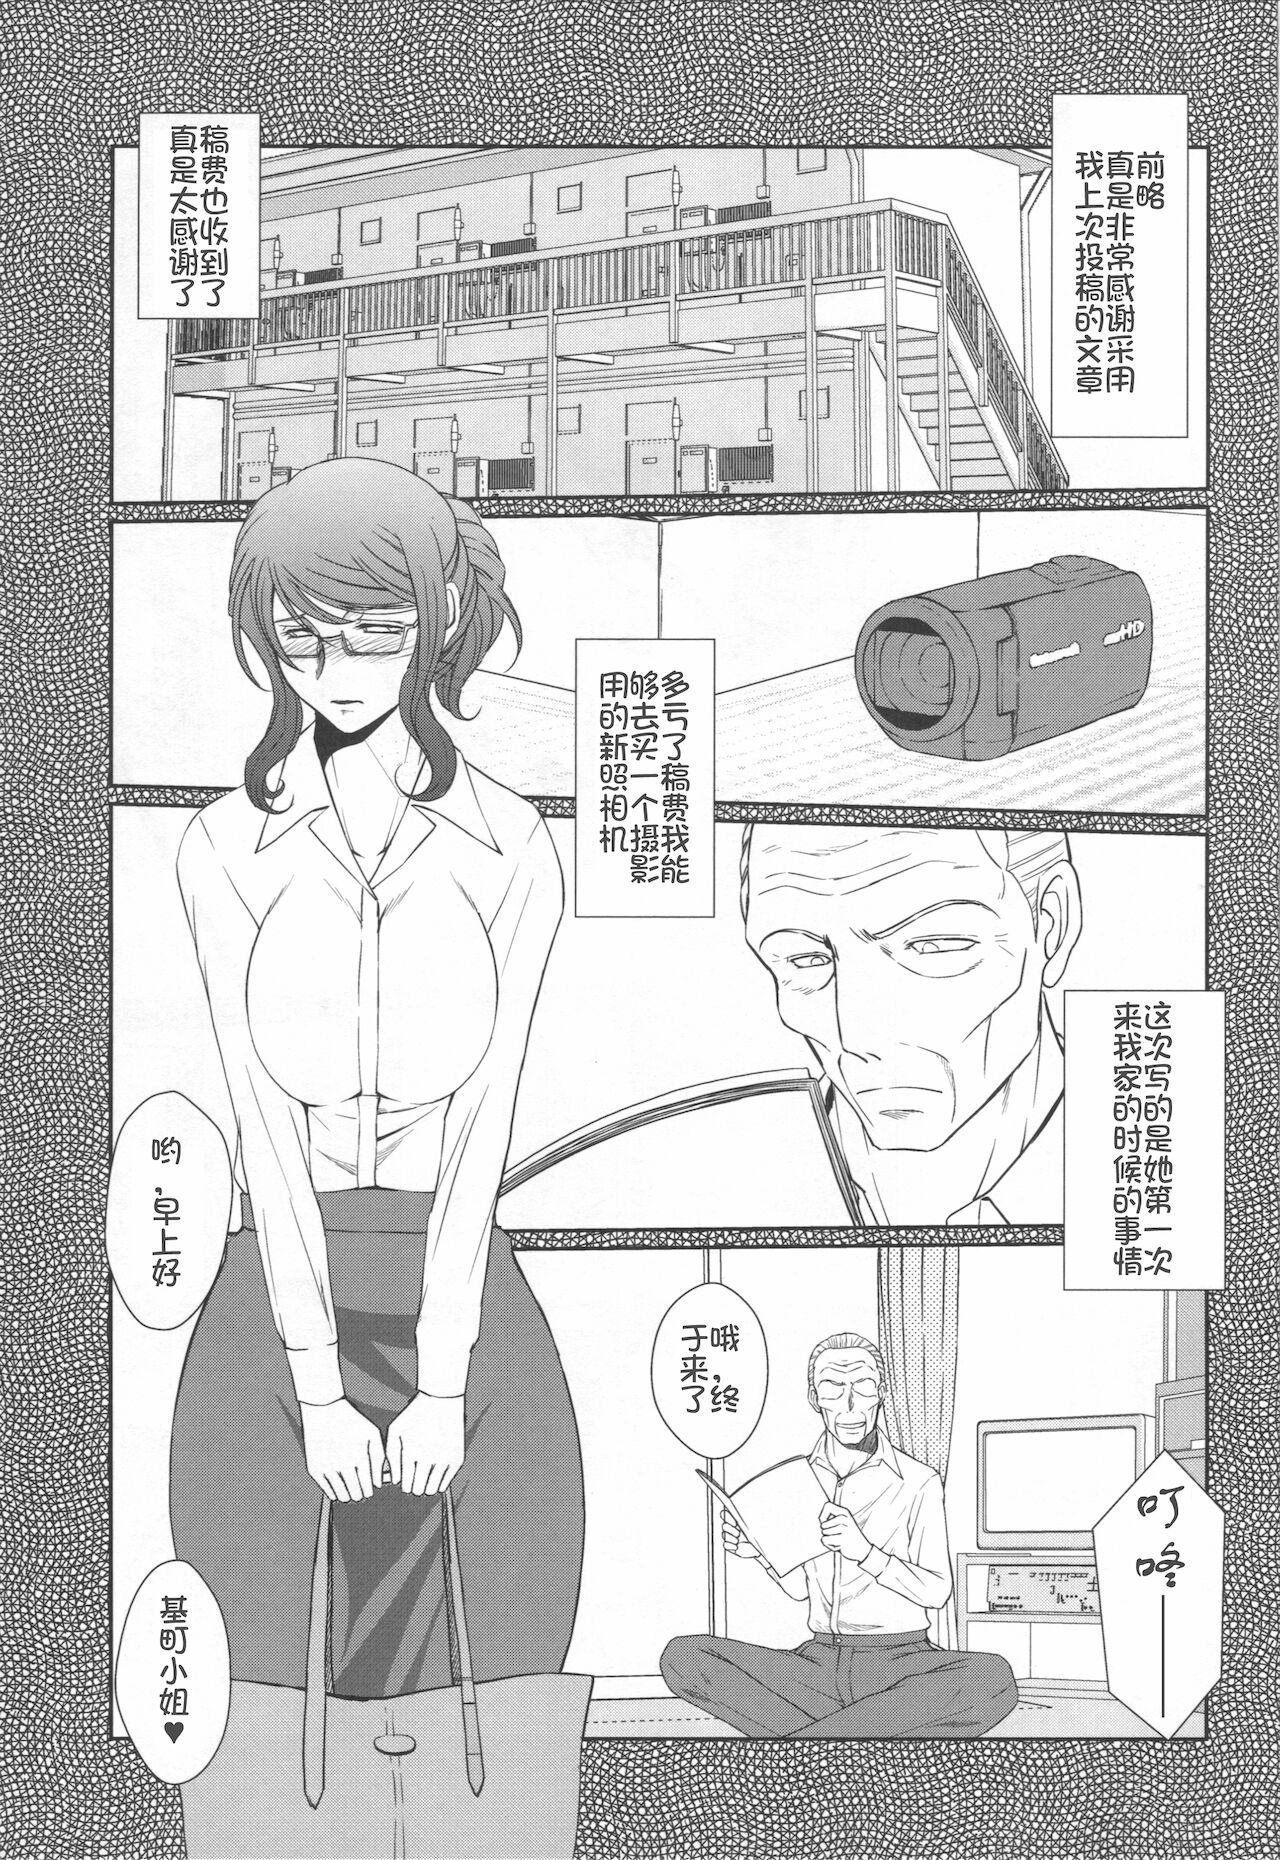 Best Blowjob Ever Zoku Akai Boushi no Onna - Woman with a red cap - Kyuujou lovers Gay Bukkakeboys - Page 3